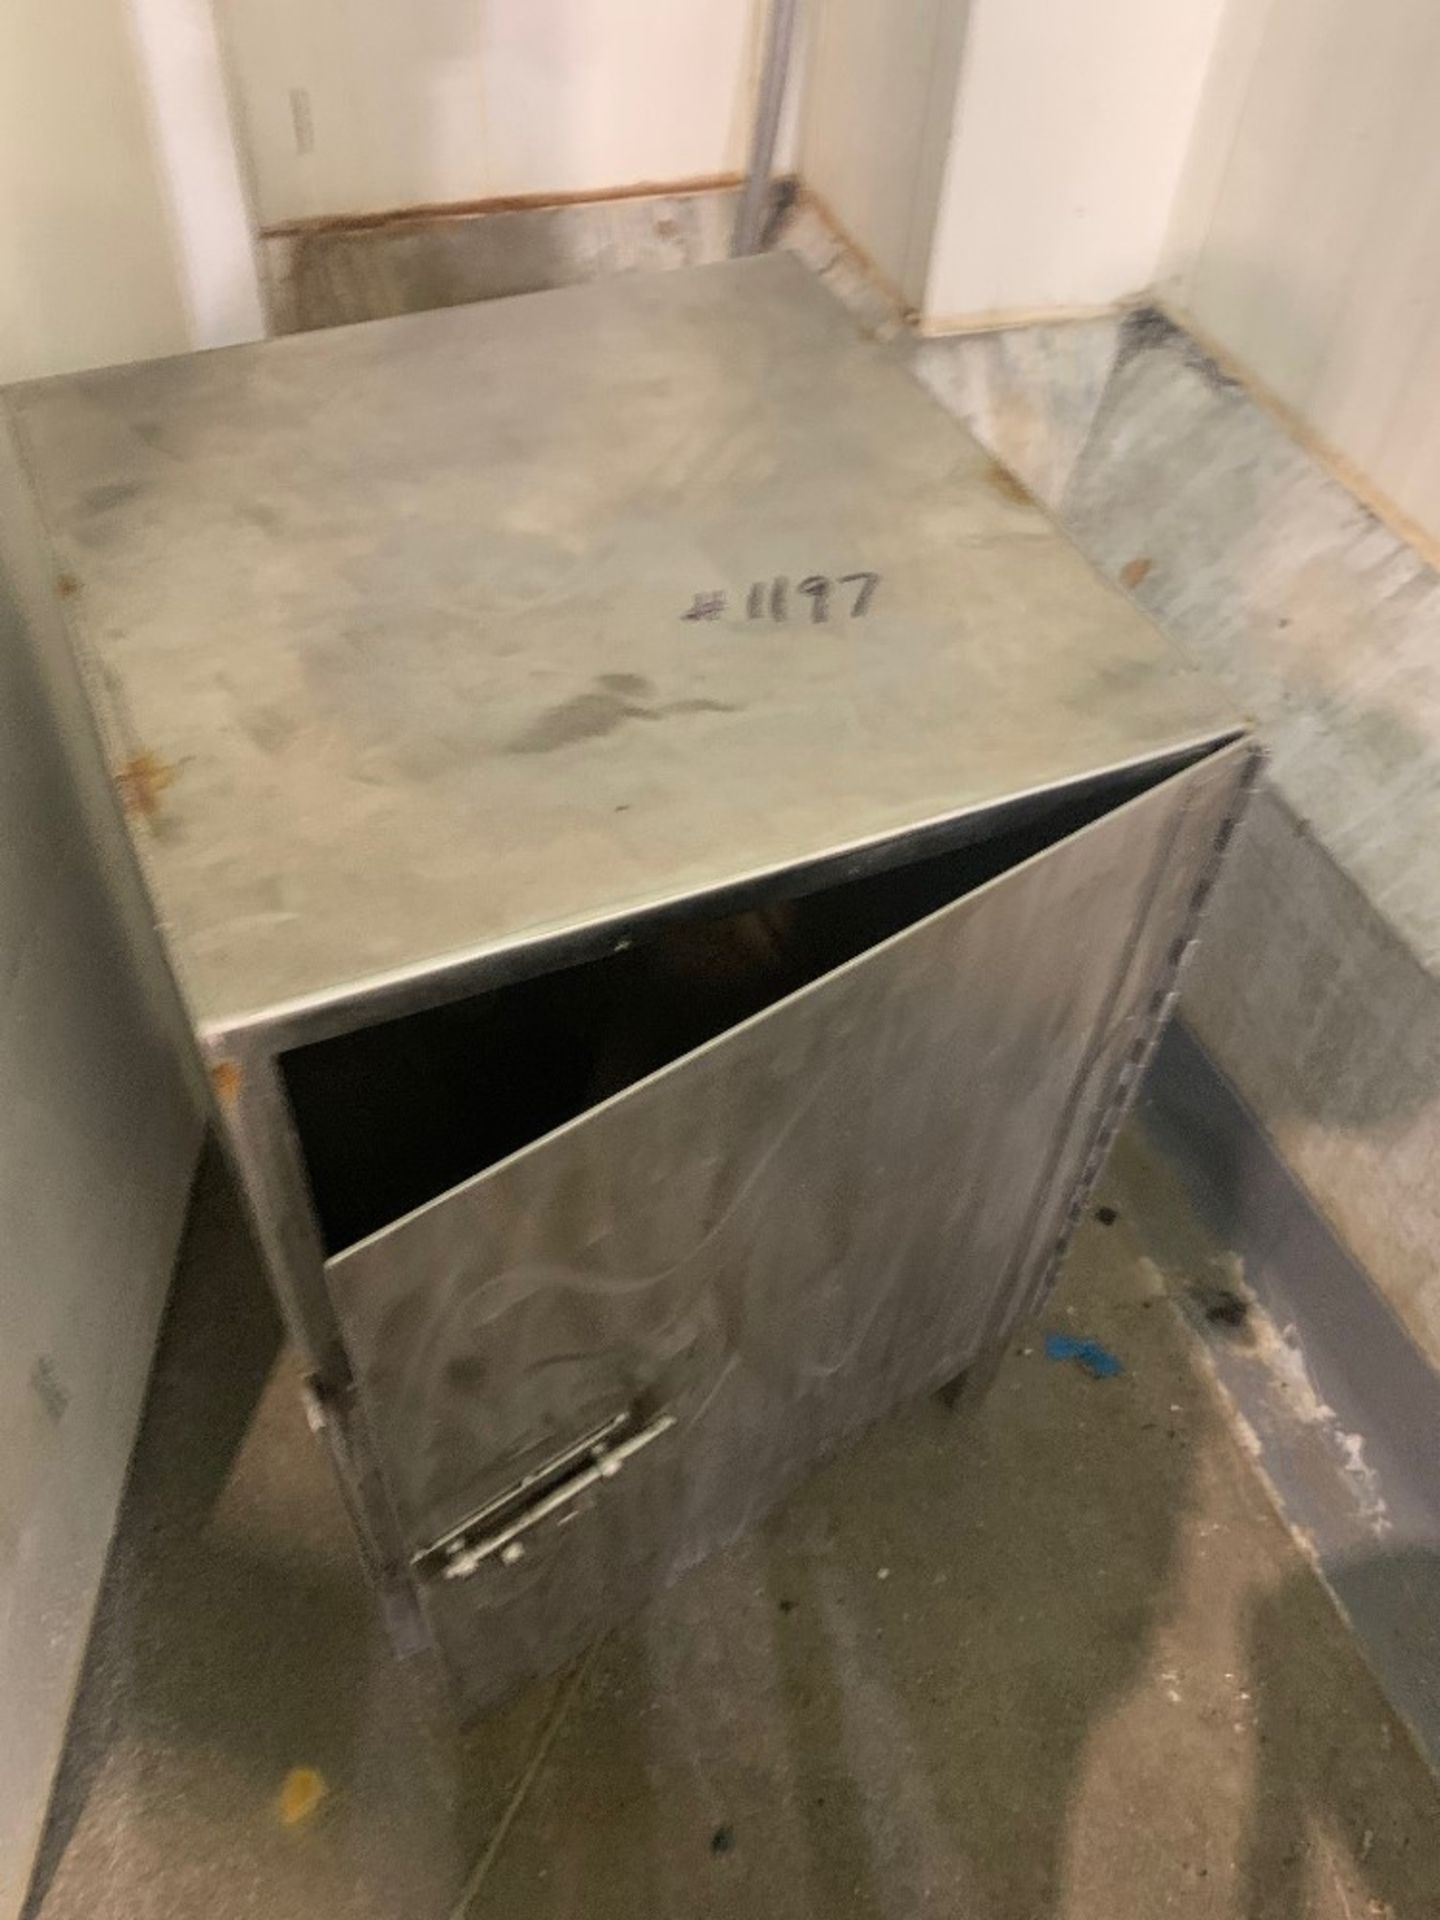 Lot Stainless Steel Parts Cart, (5) Stainless Steel Tables, Stainless Steel Cabinet, 6' Long - Image 7 of 9